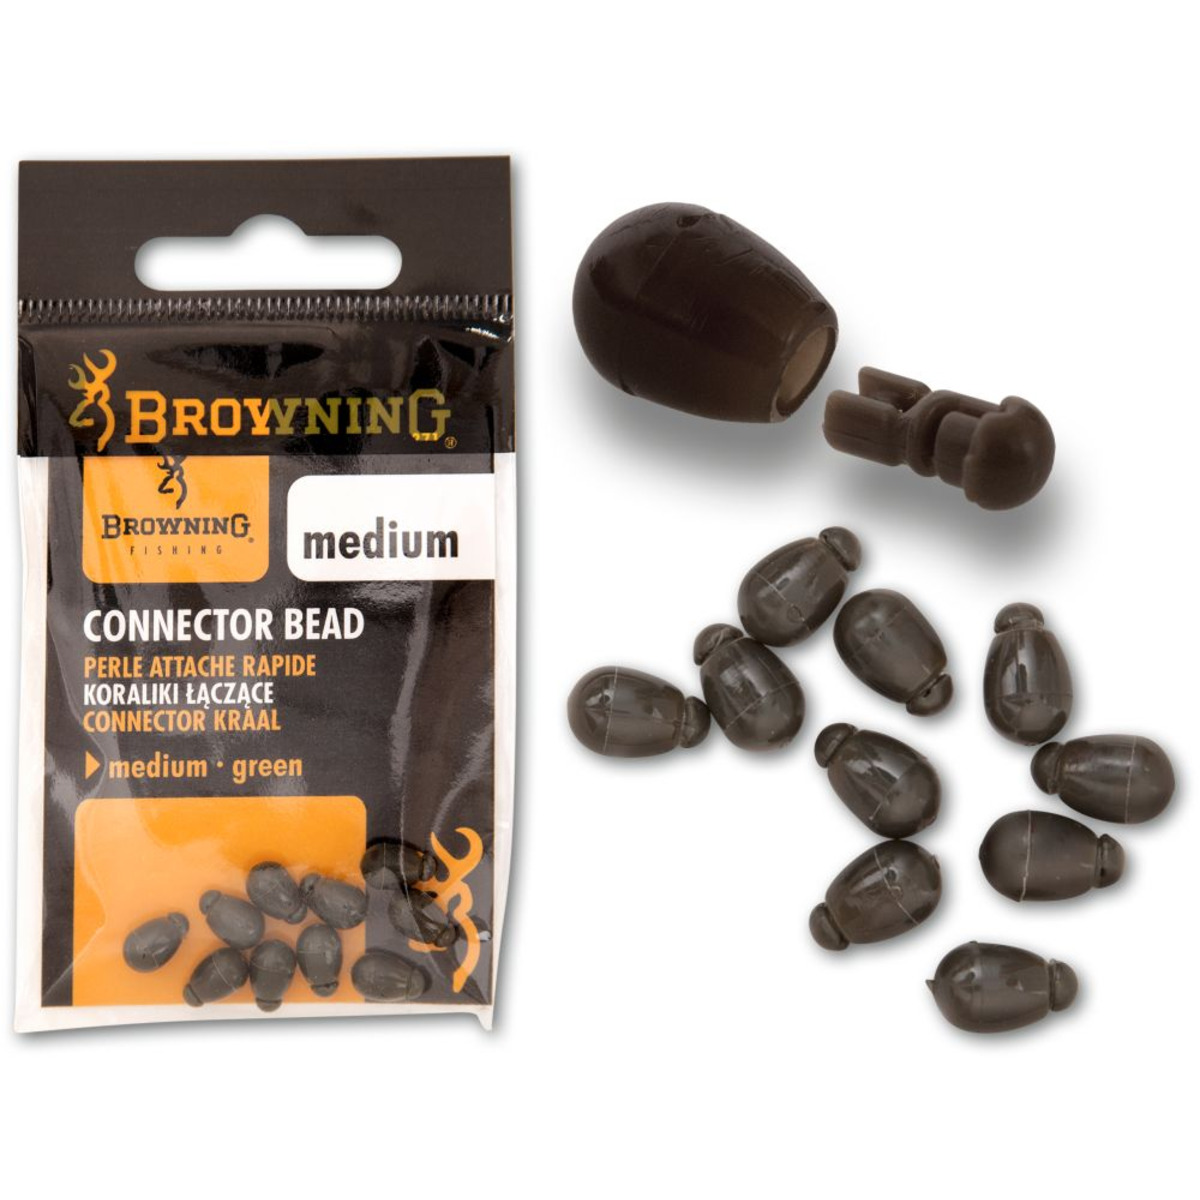 Browning Connector Bead - M